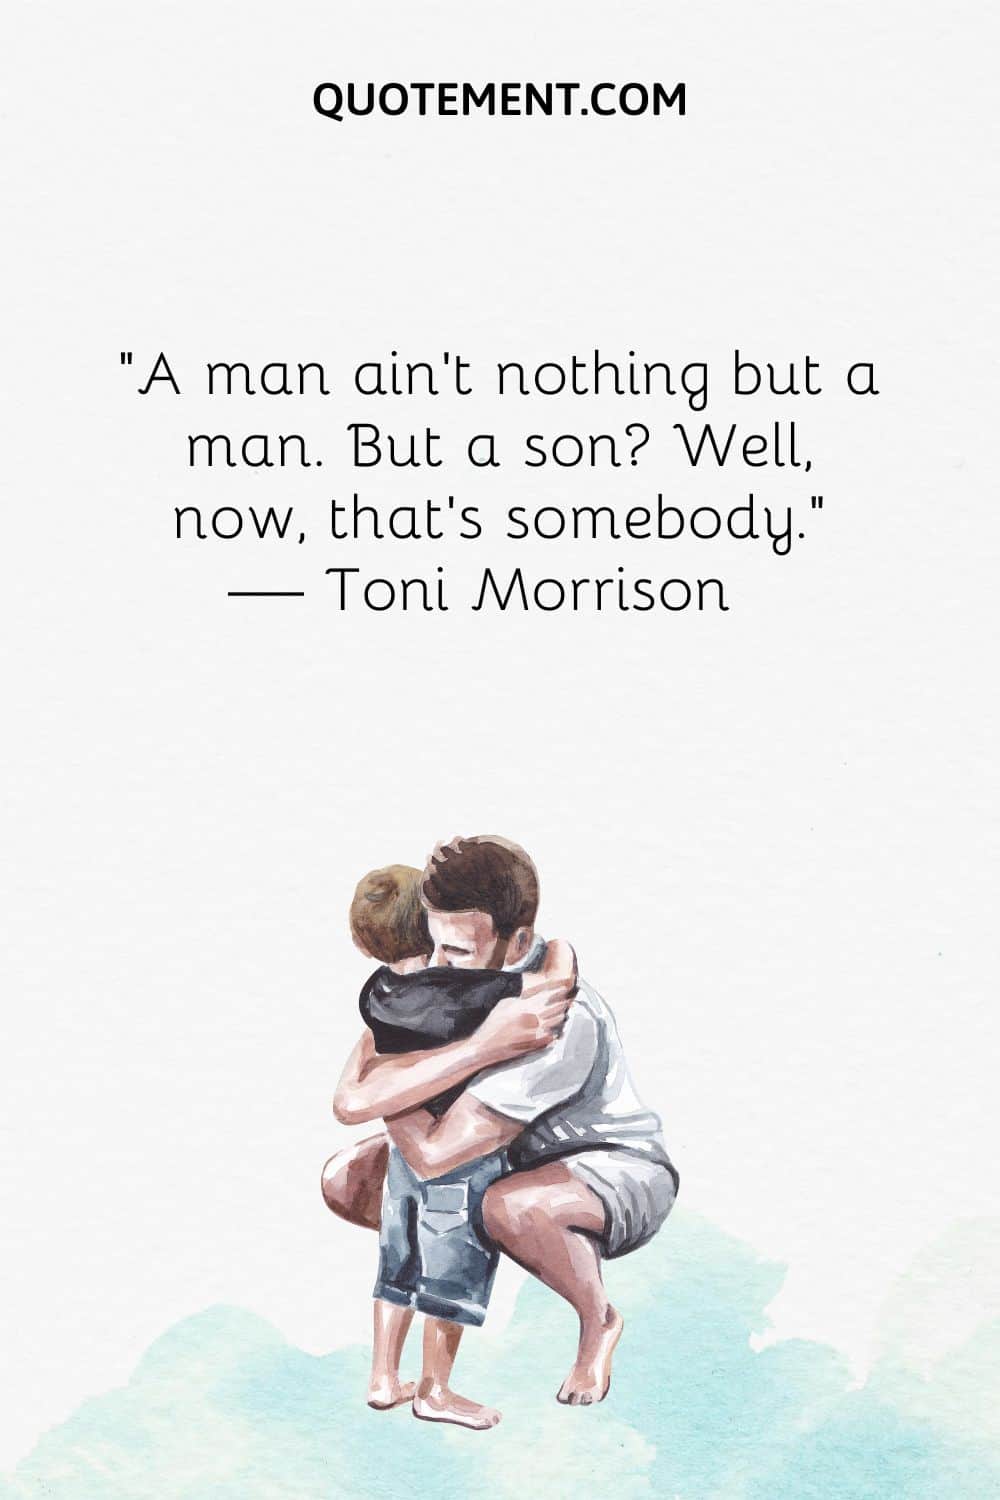 A man ain’t nothing but a man. But a son Well, now, that’s somebody.